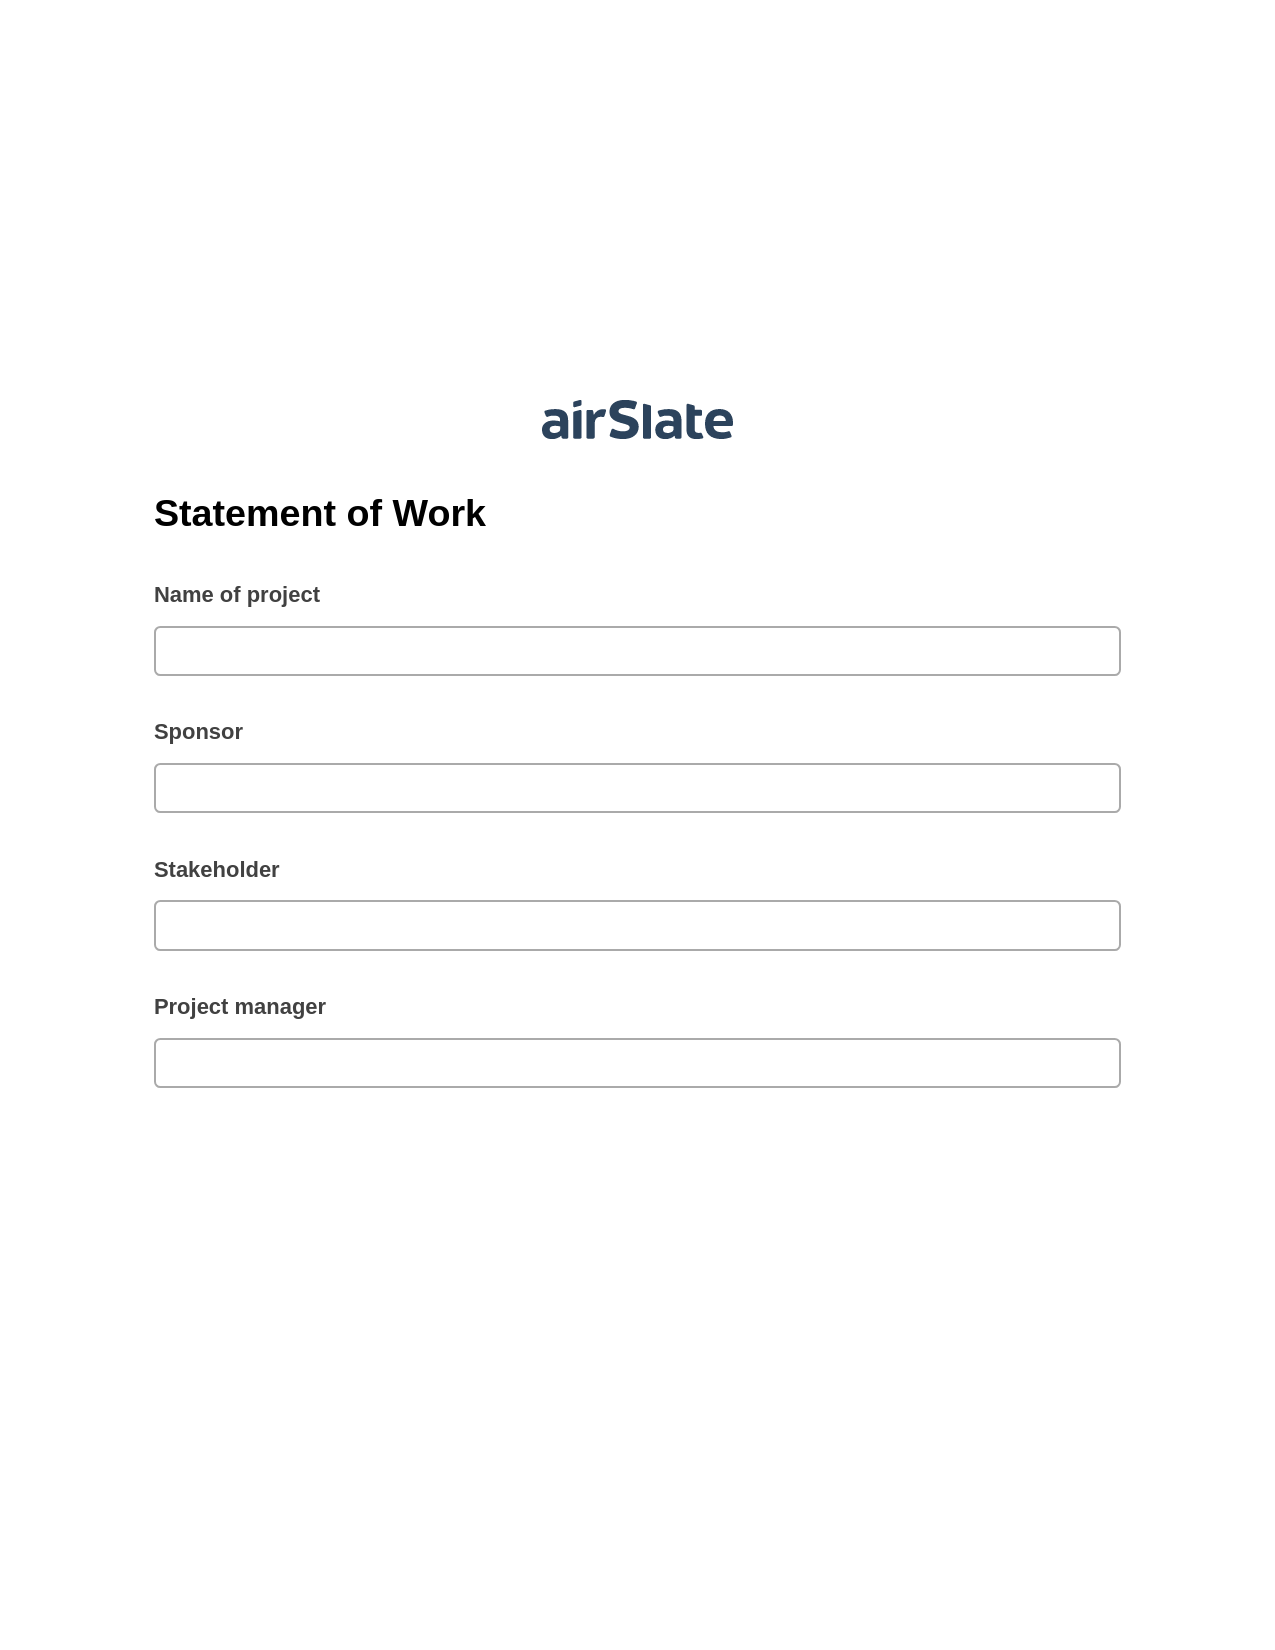 Statement of Work Pre-fill from another Slate Bot, Google Cloud Print Bot, Export to Excel 365 Bot